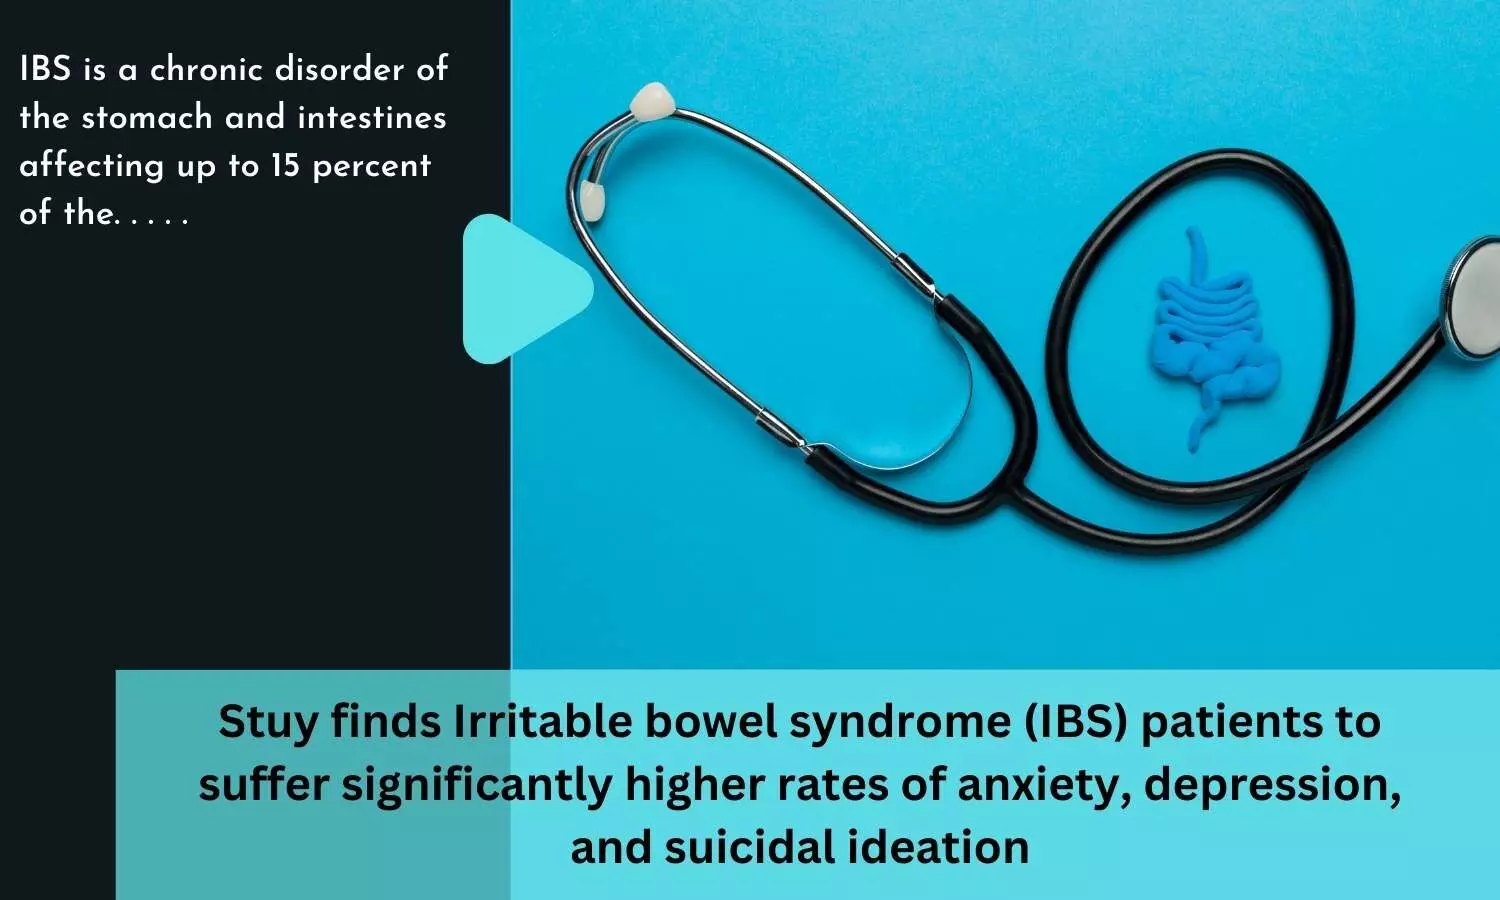 Stuy finds Irritable bowel syndrome (IBS) patients to suffer significantly higher rates of anxiety, depression, and suicidal ideation